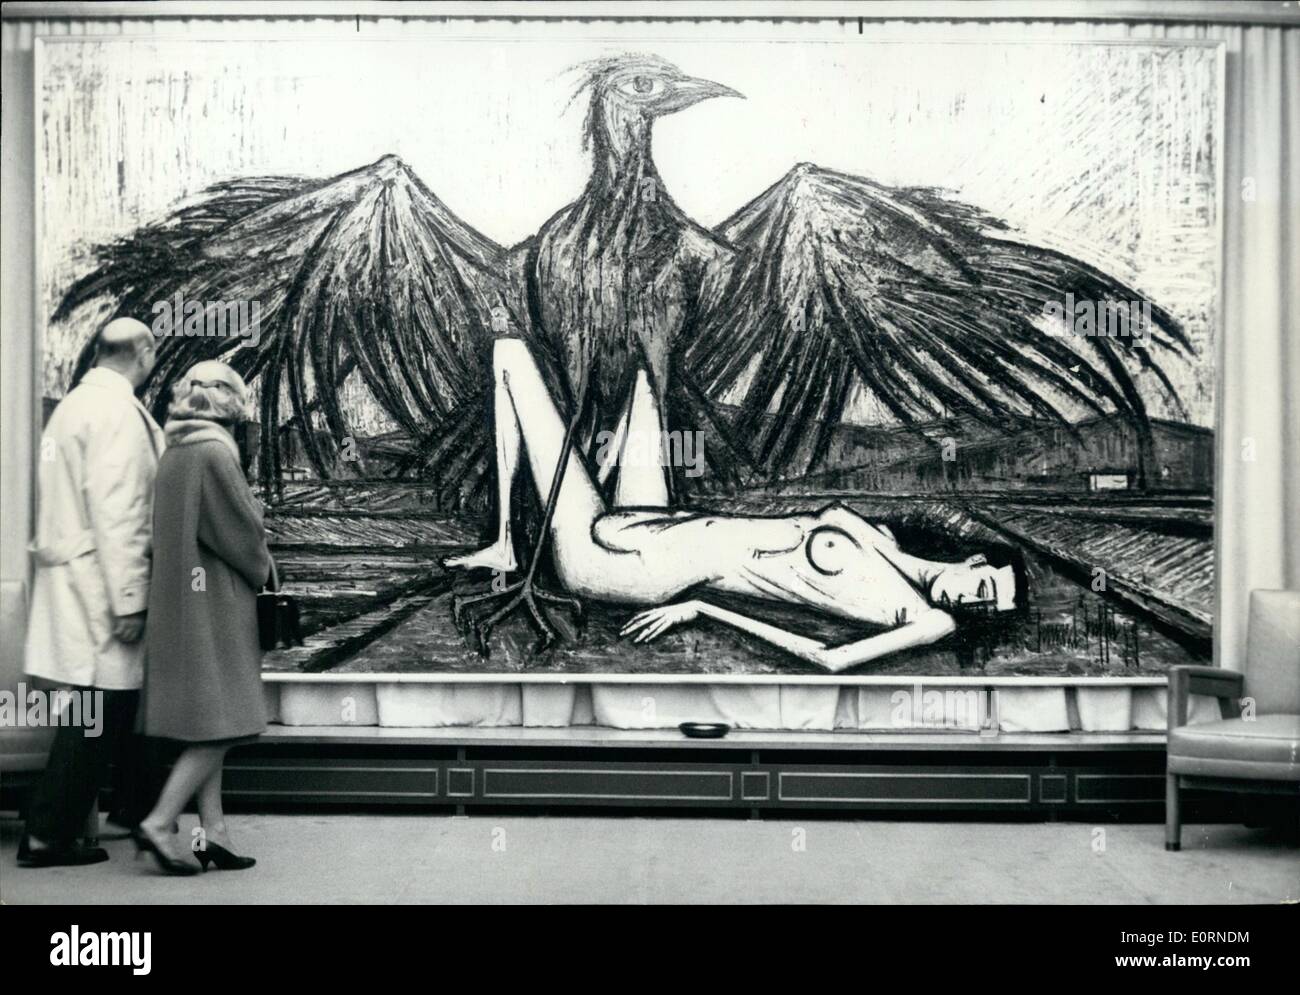 Feb. 02, 1960 - Bernard Burrfet gives up ''Blanck and White'' uses colour: An Exhibition of Bernard Buffet's latest paintings opened in a Paris art gallery in the Avenue Matignon to-day. In his new paintings Bernard Buffet who seems to have given up his usual ''Black and White'' style uses colour for the first time. most of the paintings are dedicated to Birds. Photo shows One of the new paintings by Bernard Buffet. Stock Photo